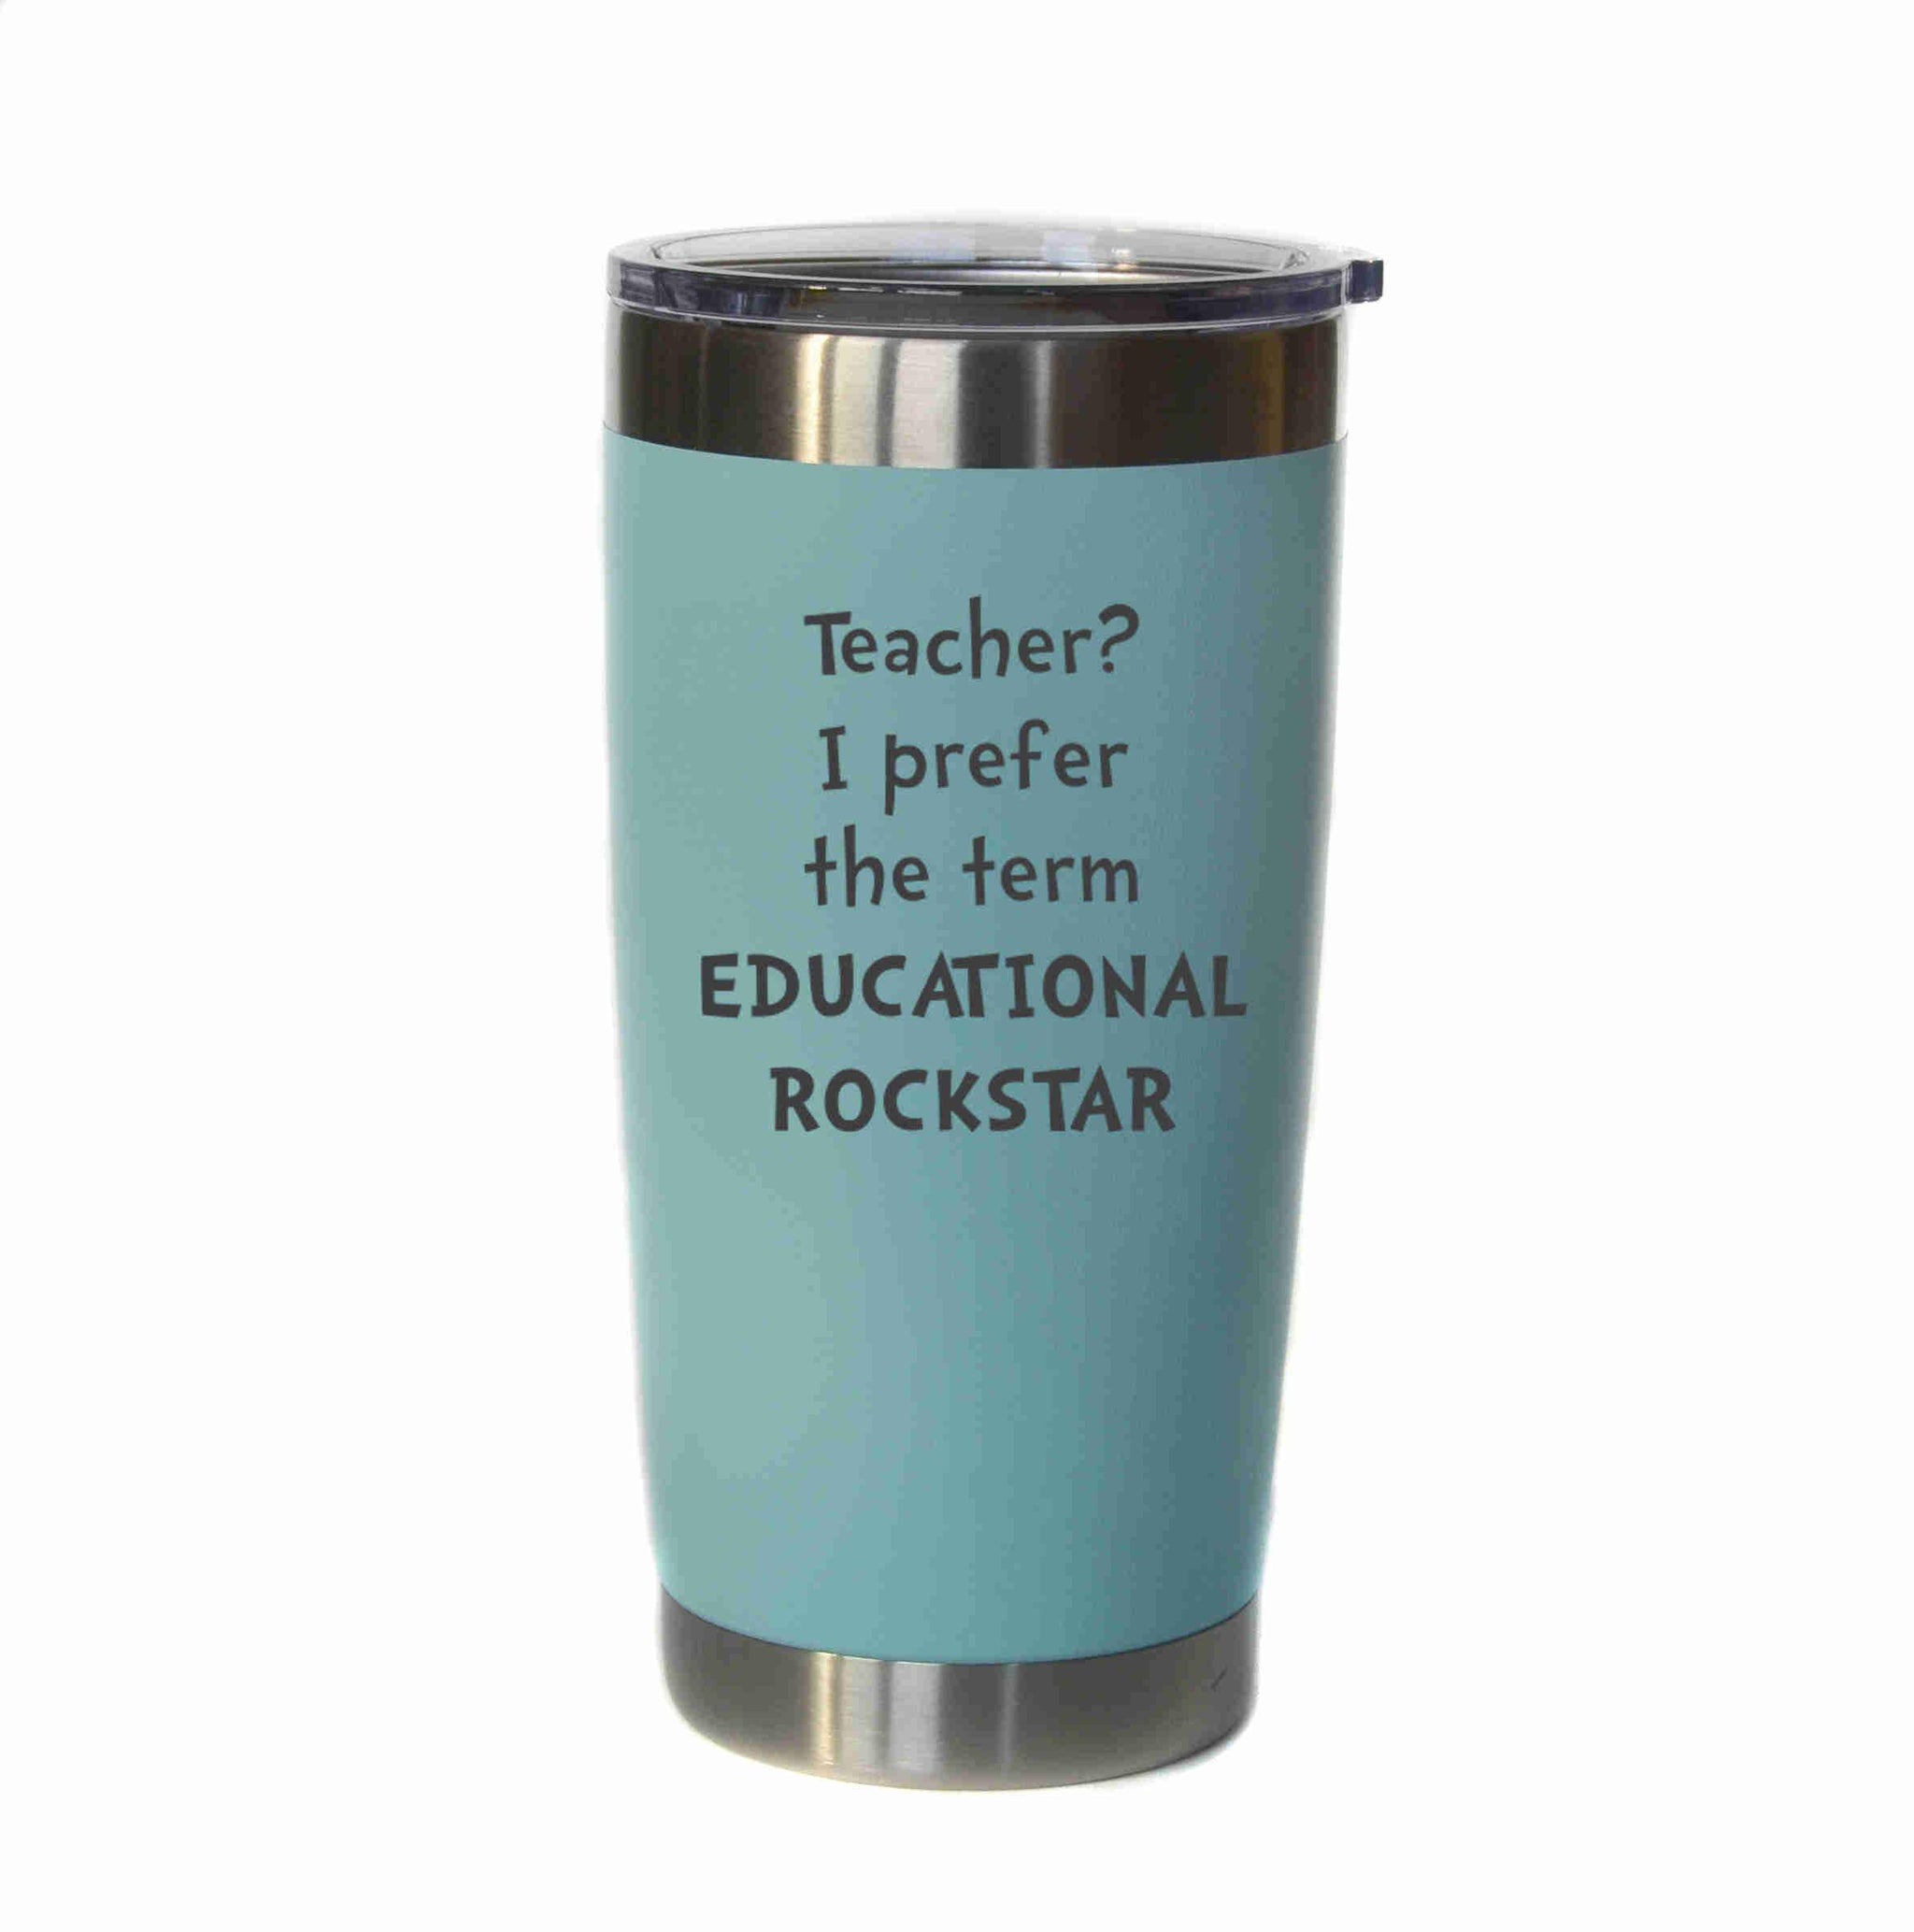 I run on hot tea and books 20 oz. Tumbler - Amped Up Learning